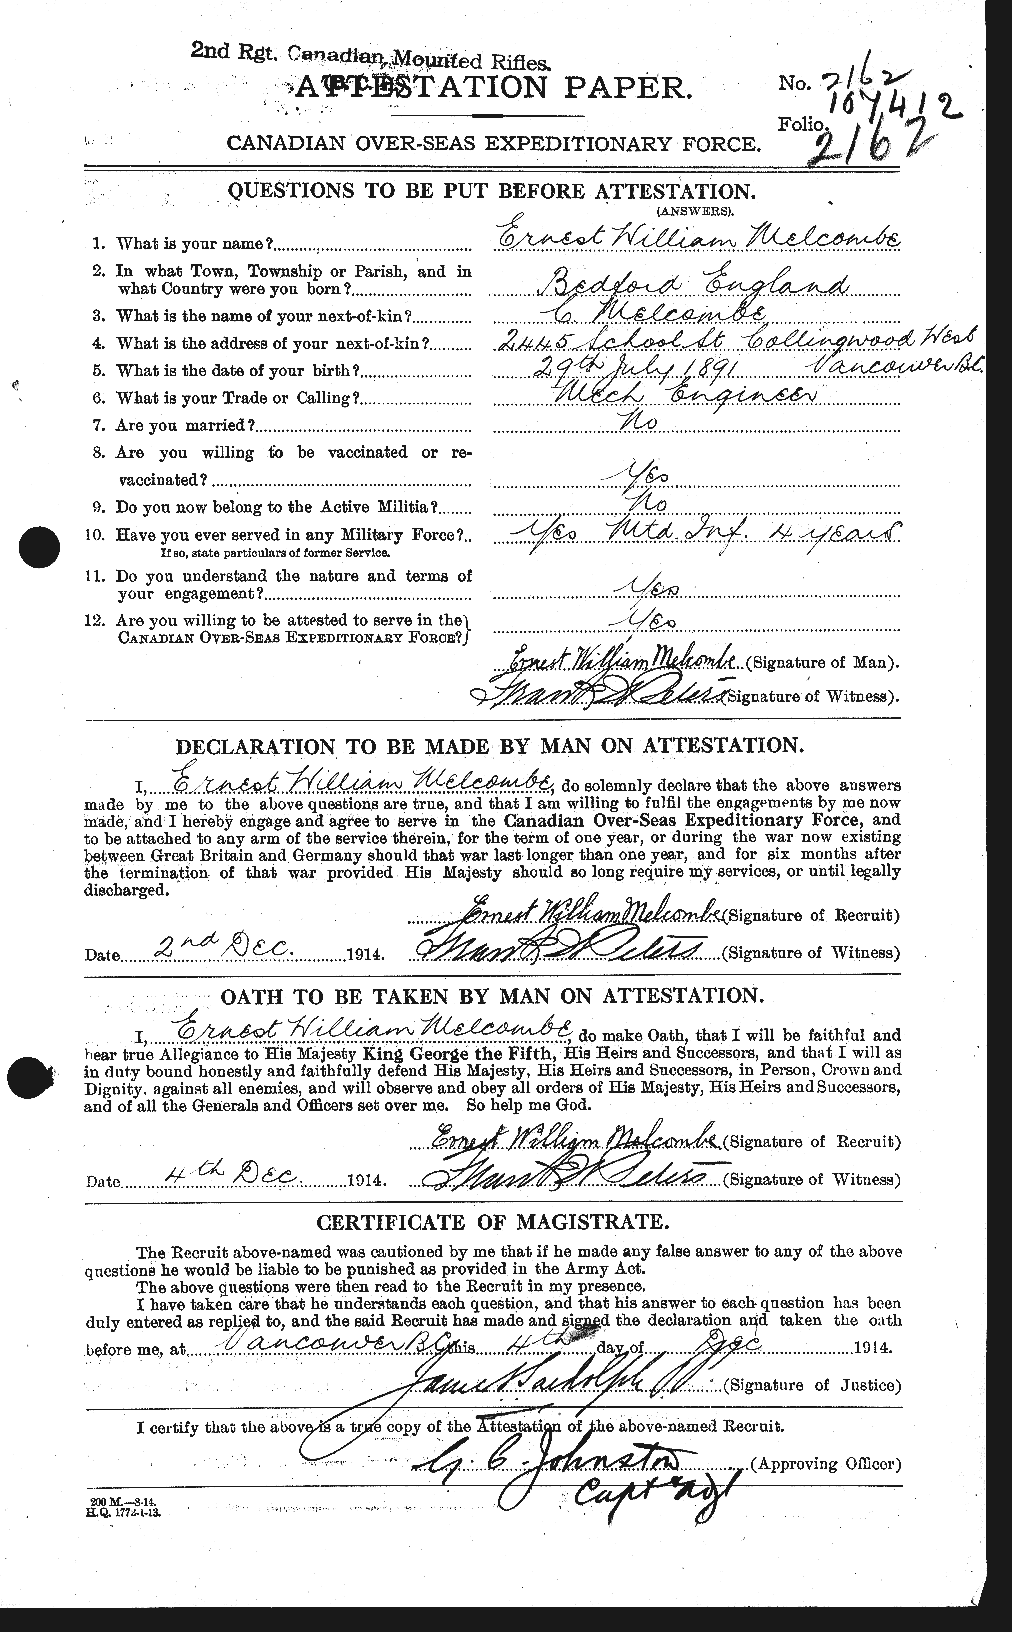 Personnel Records of the First World War - CEF 493599a